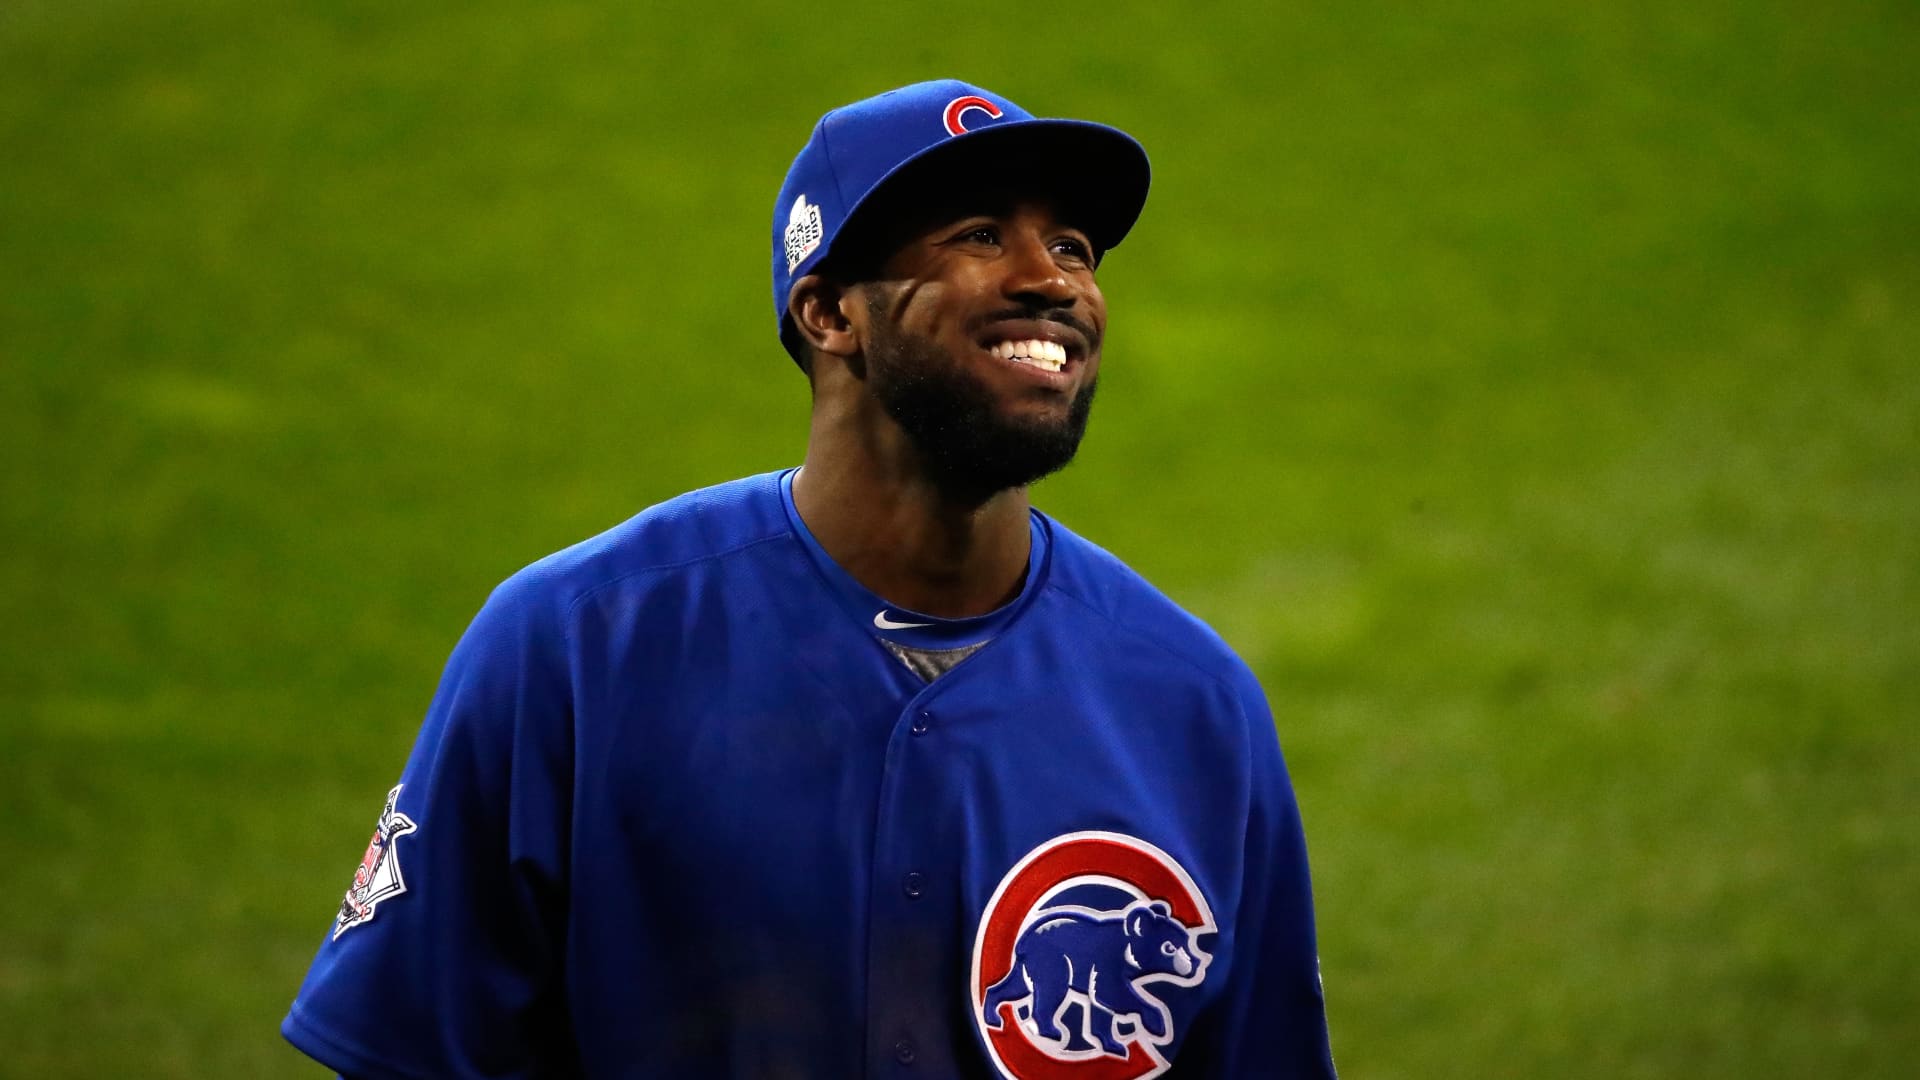 Dexter Fowler during game seven of the 2016 World Series.